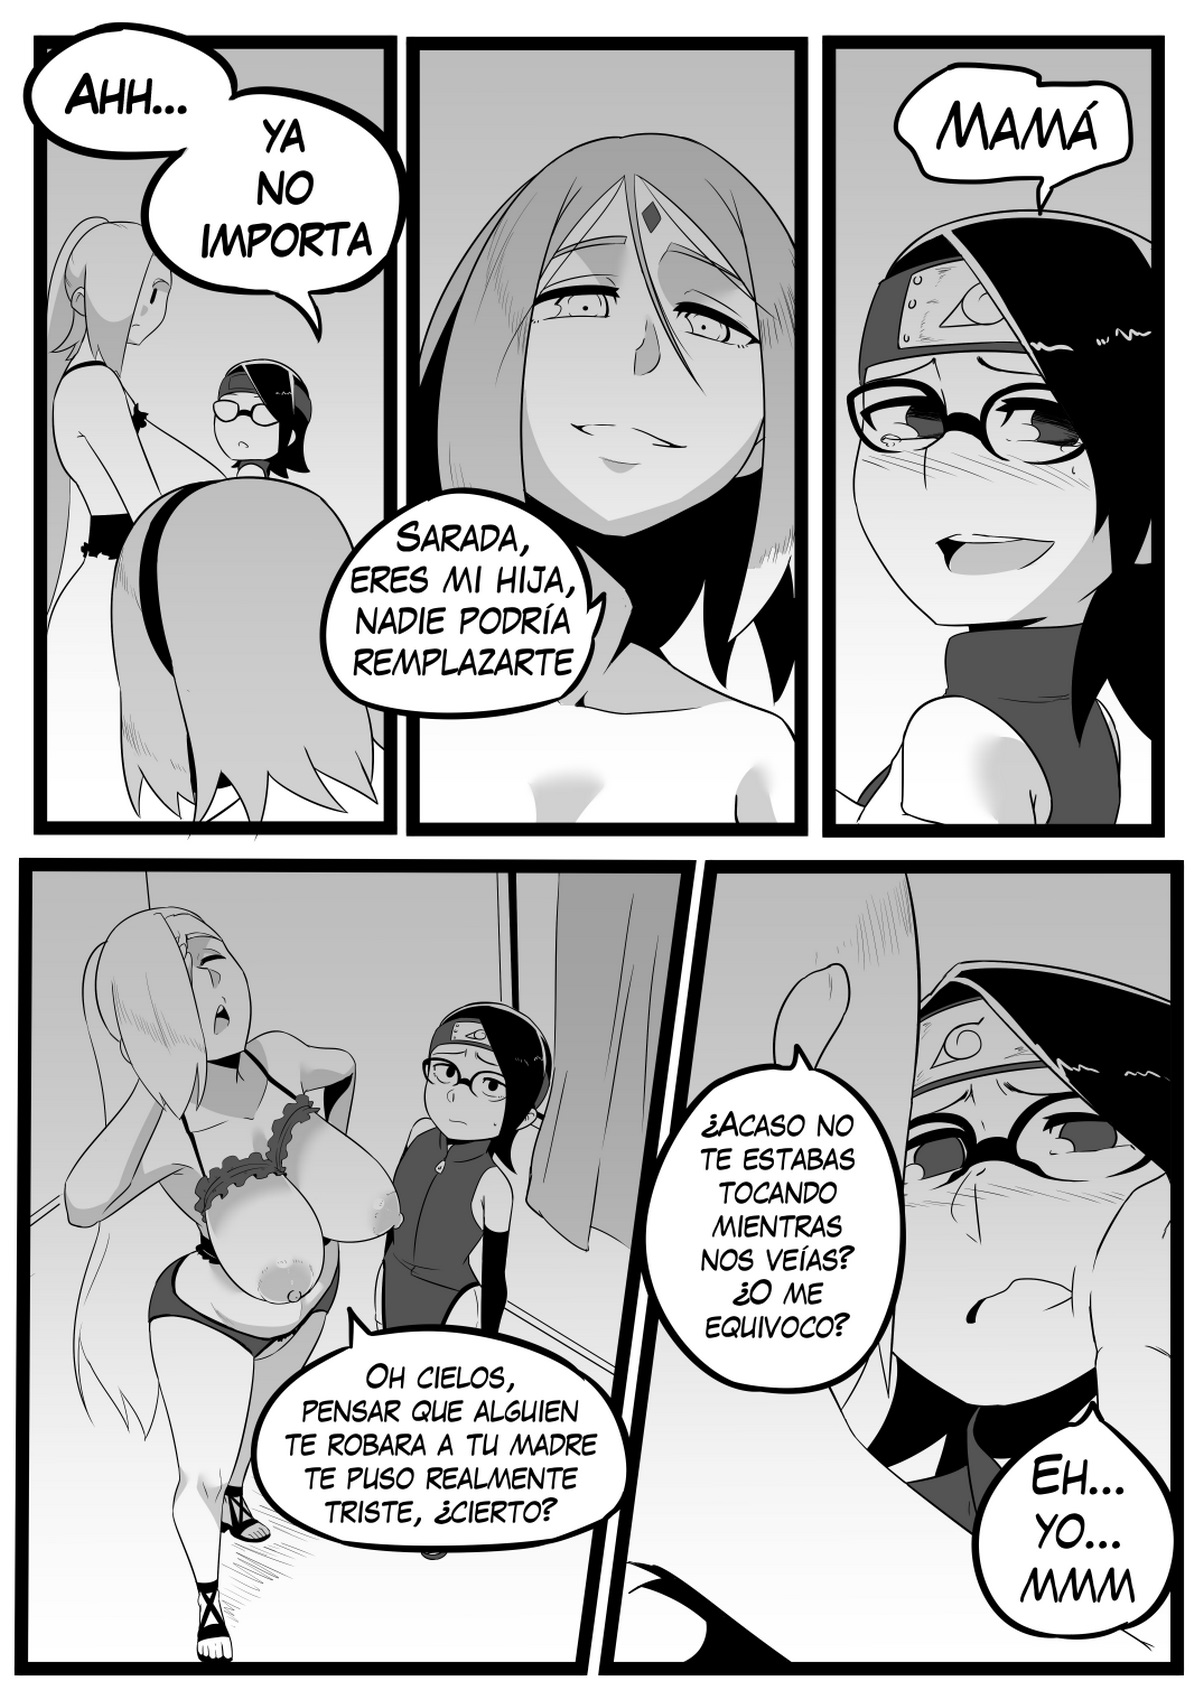 Inmoral MOTHER parte 3